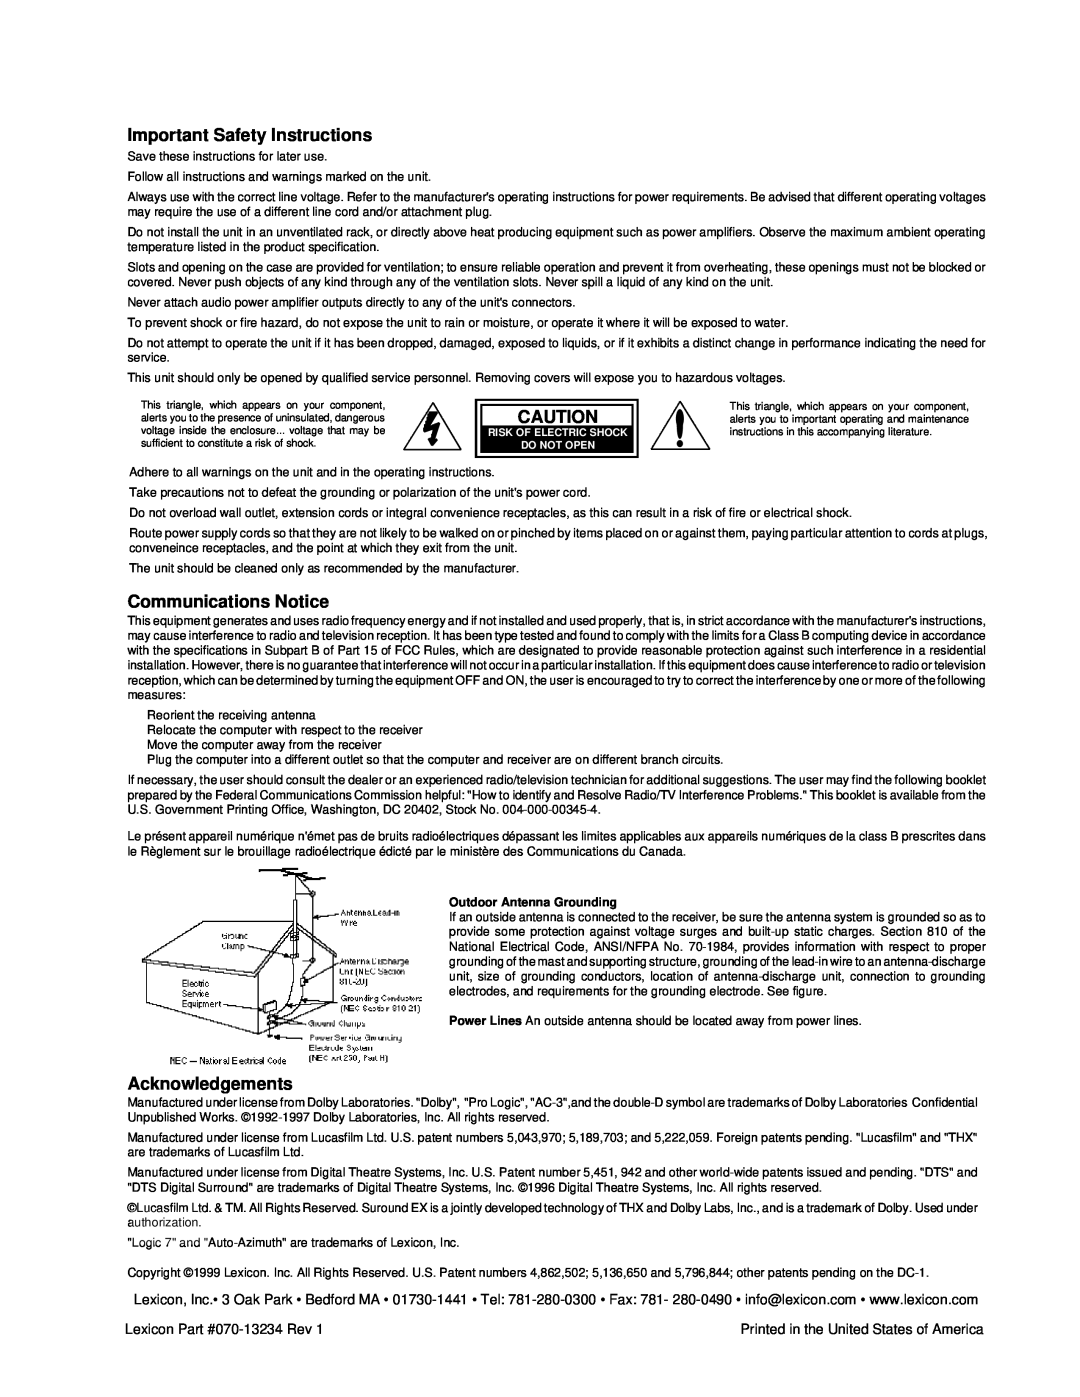 Lexicon Lexicon Part #070-13234 owner manual Important Safety Instructions, Communications Notice, Acknowledgements 